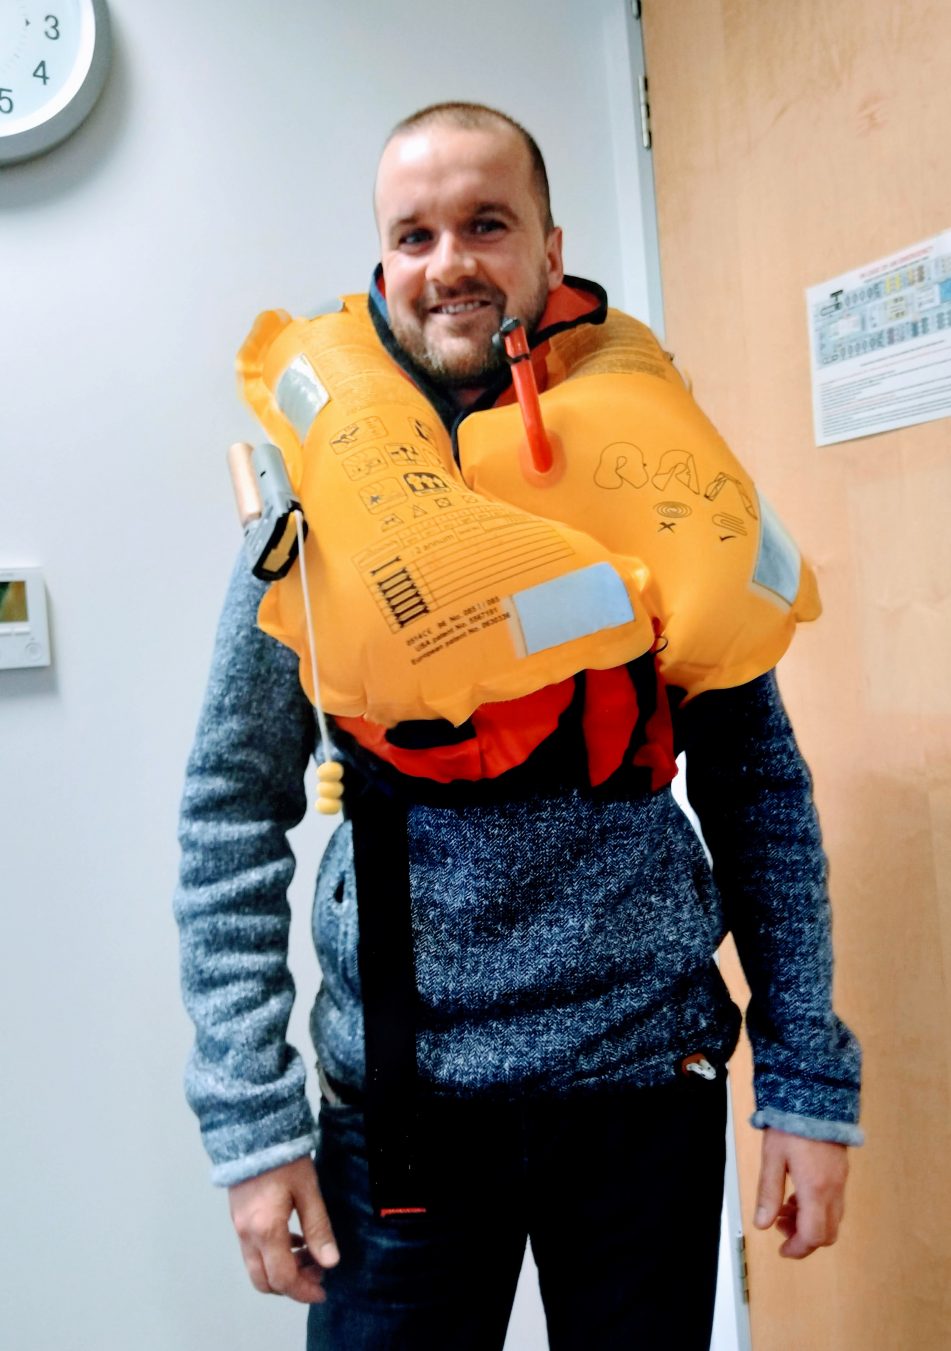 Pete wearing an inflated lifejacket